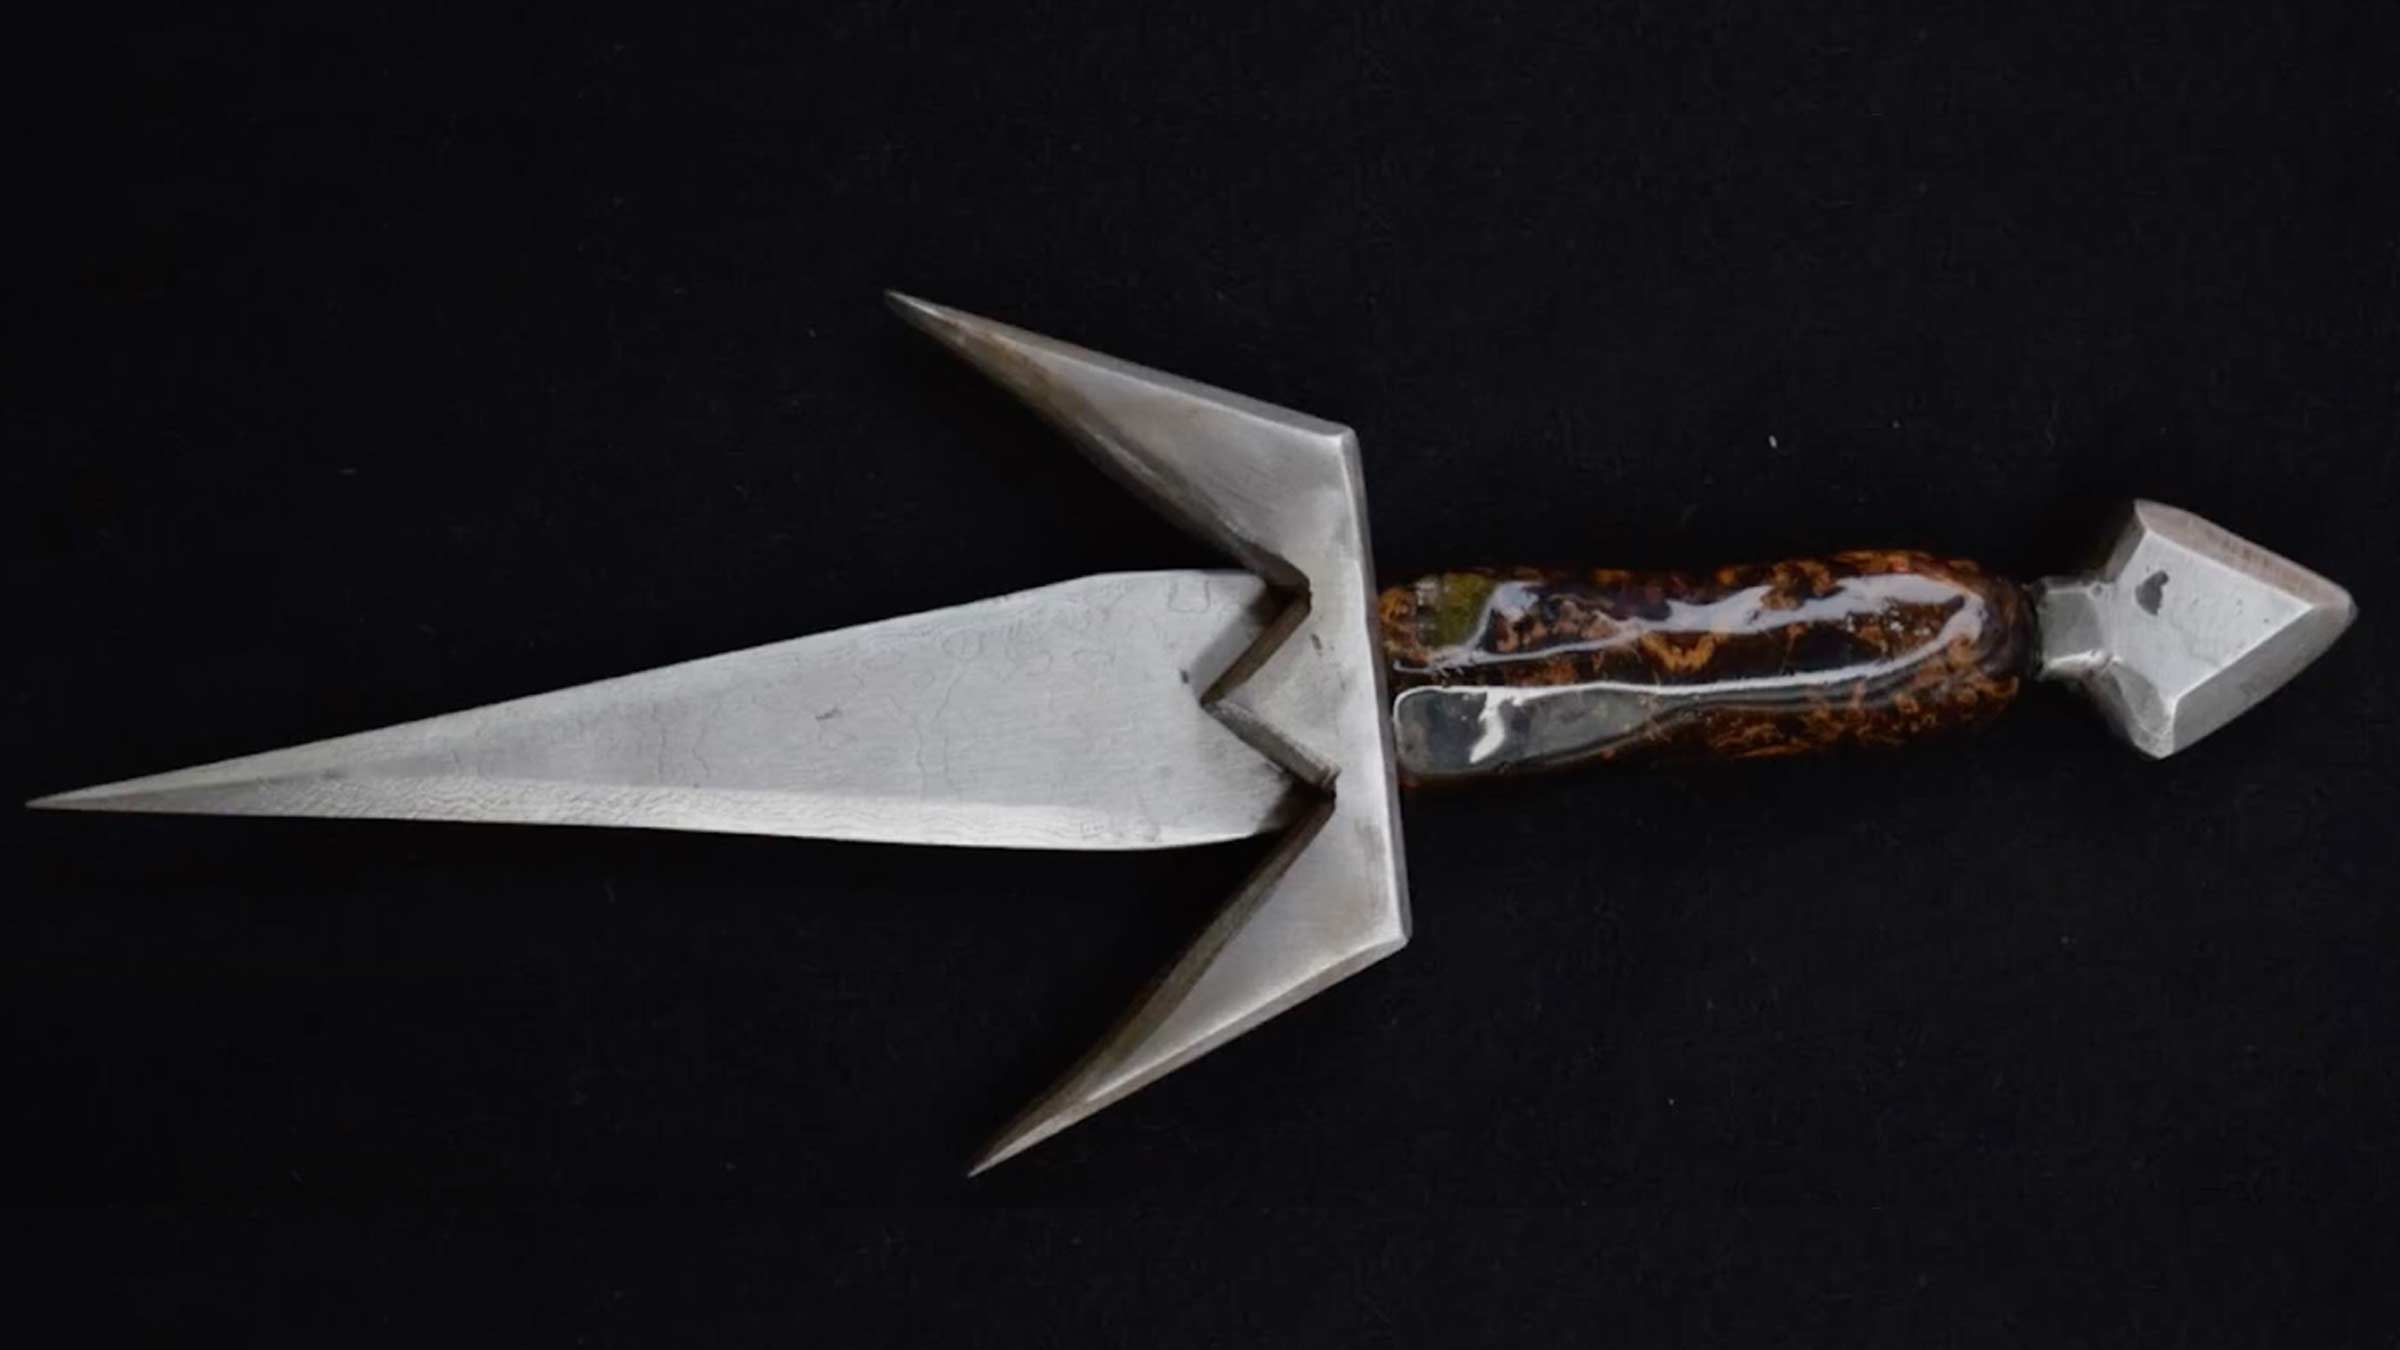 blade created by Fulton Schools students for the Minerals, Metals and Materials Society’s Bladesmithing competition